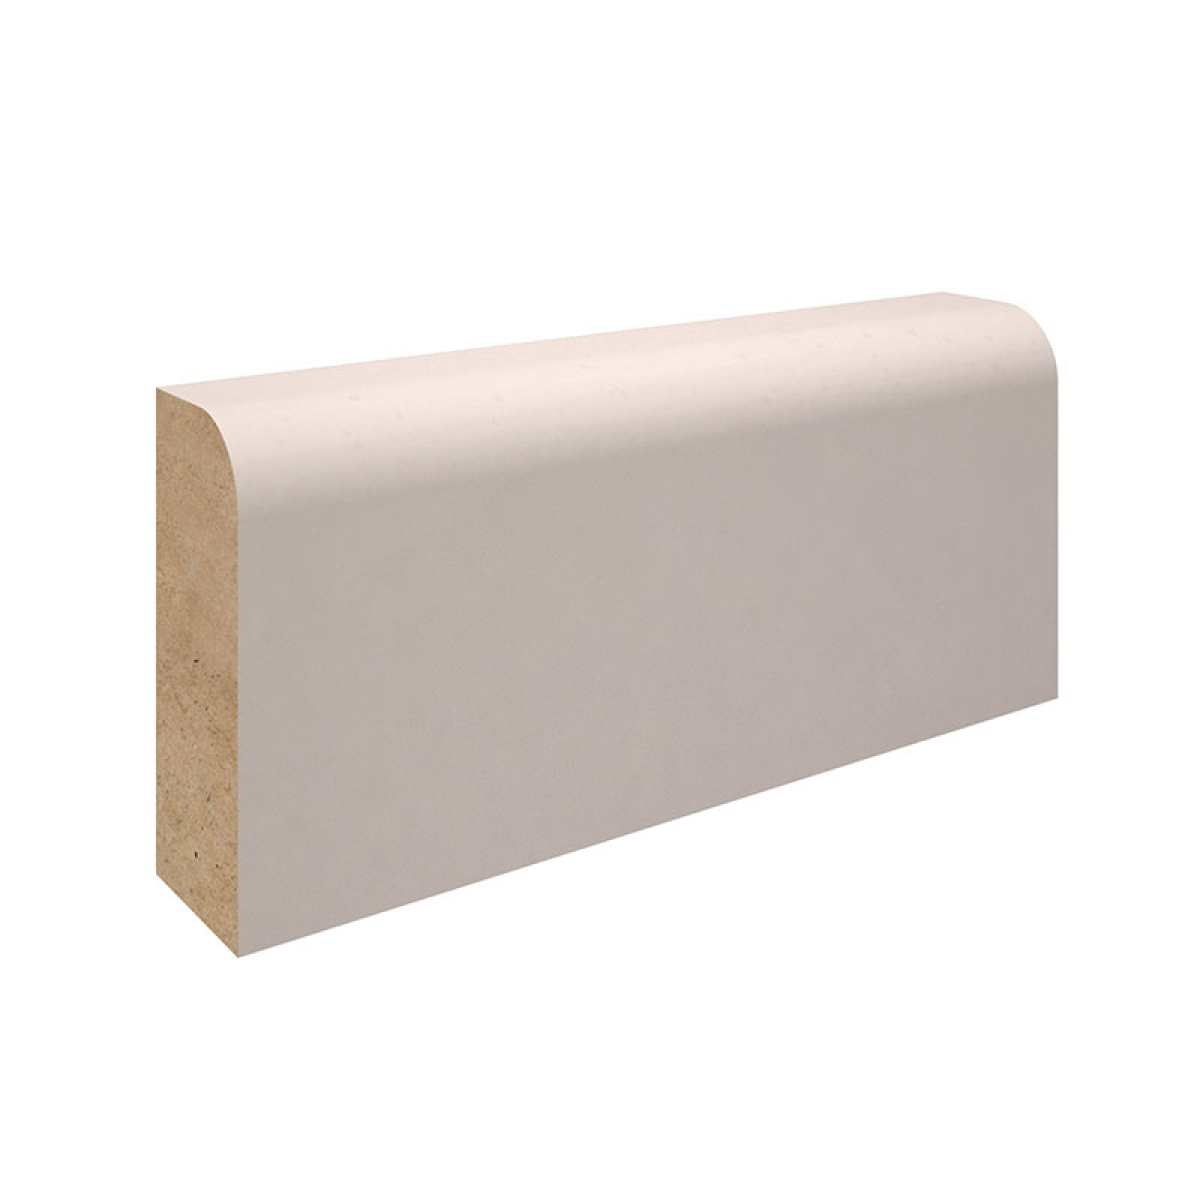 Pencil Round Skirting Board